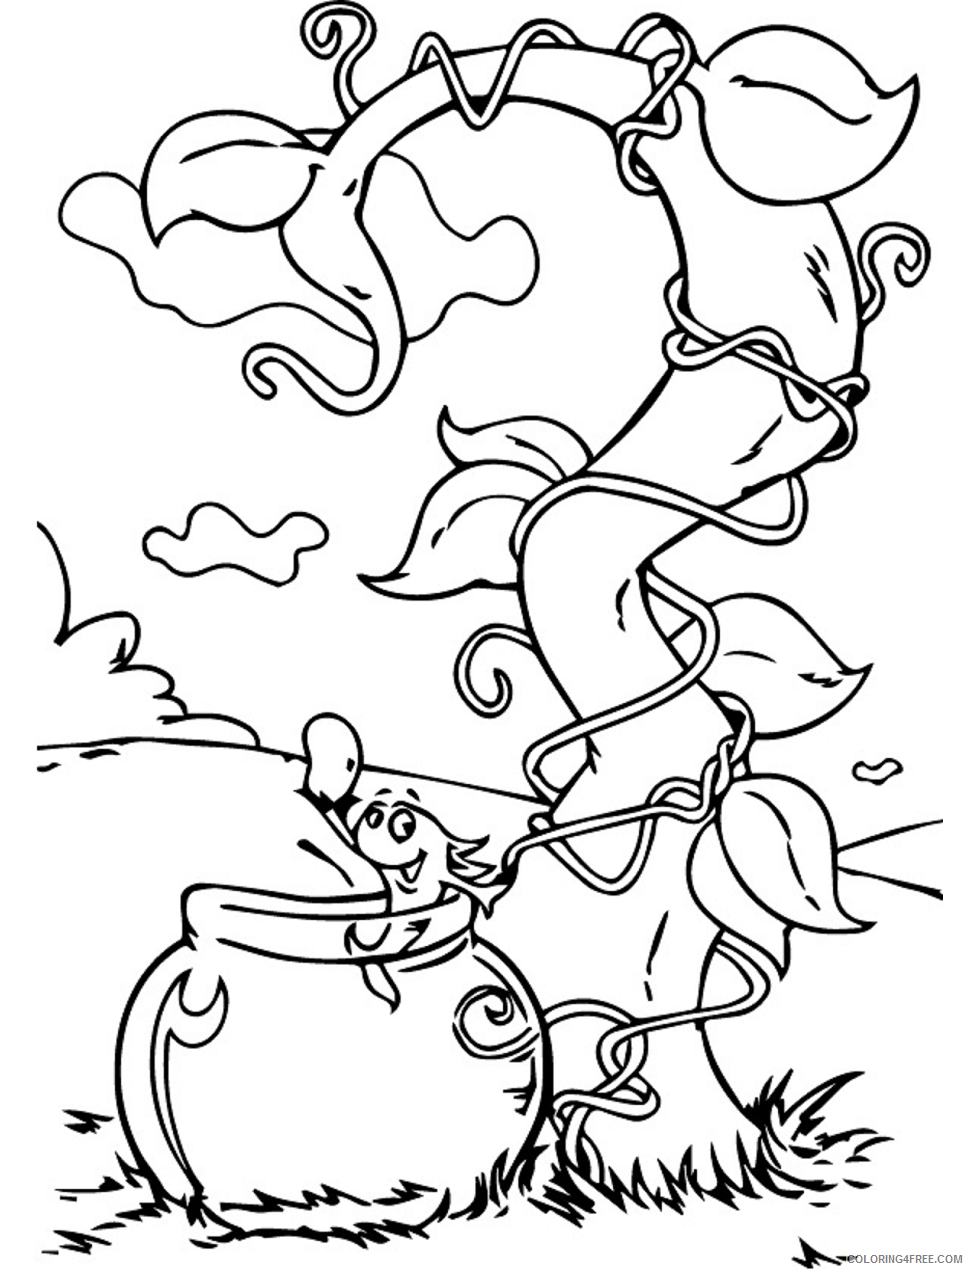 Fish Coloring Pages Animal Printable Sheets the_fish 2021 2059 Coloring4free